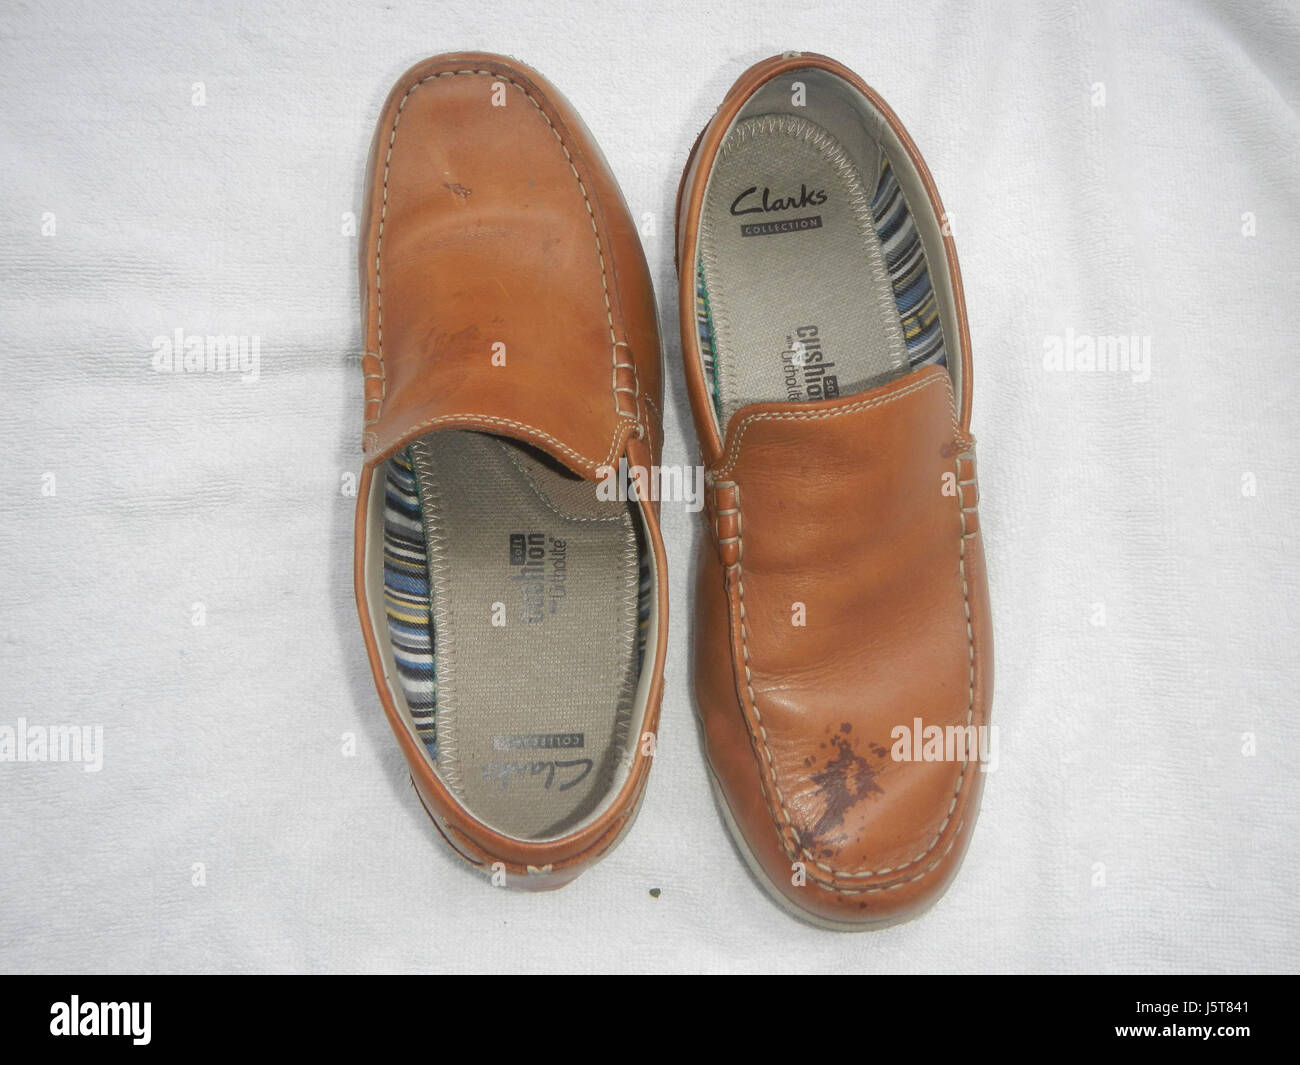 01846 Clarks Collection Stock Photo